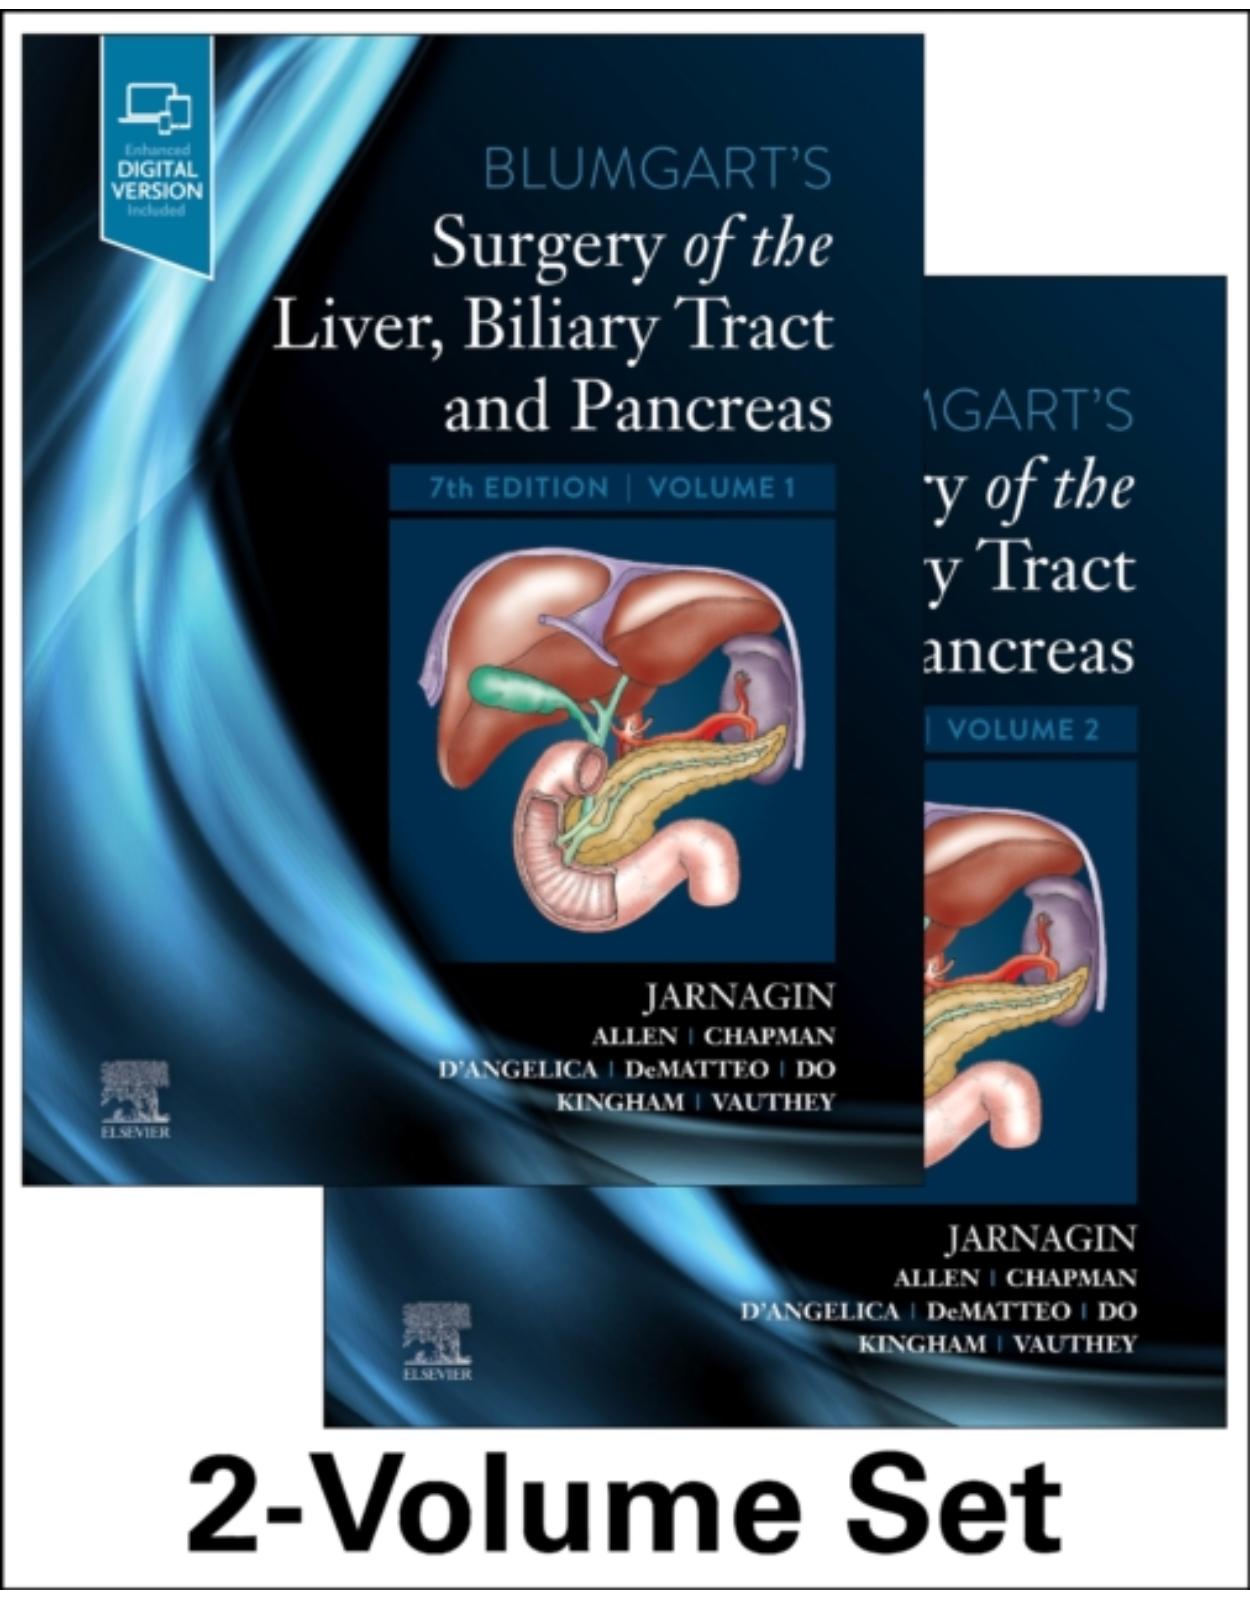 Blumgart’s Surgery of the Liver, Biliary Tract and Pancreas, 2-Volume Set